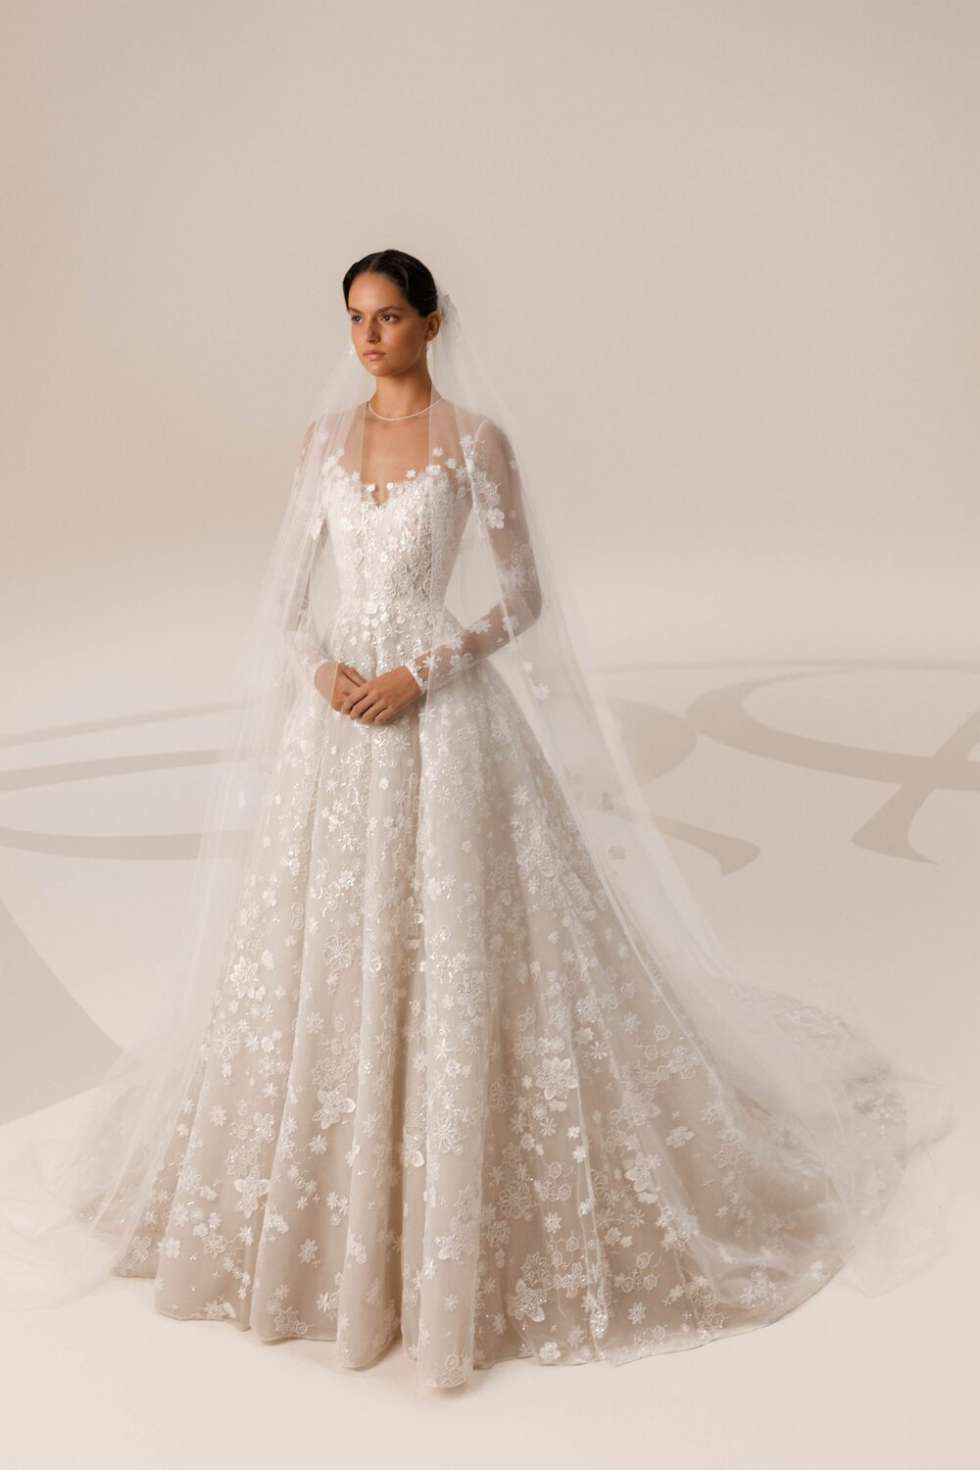 The Elie Saab Fall 2023 Wedding Dress Collection